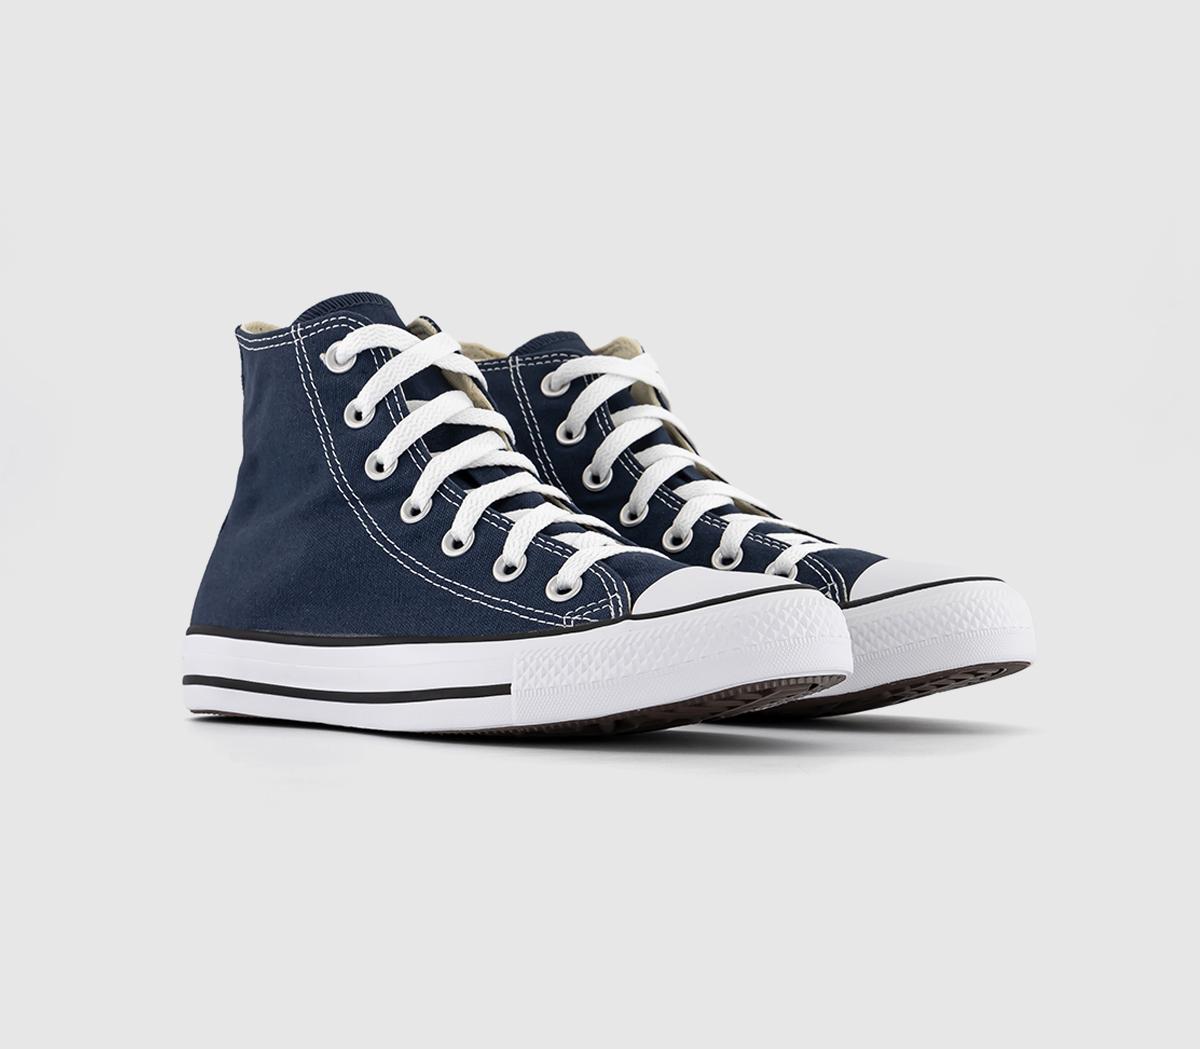 Mens Converse All Star Hi Canvas Trainers In Navy Blue And White, 7